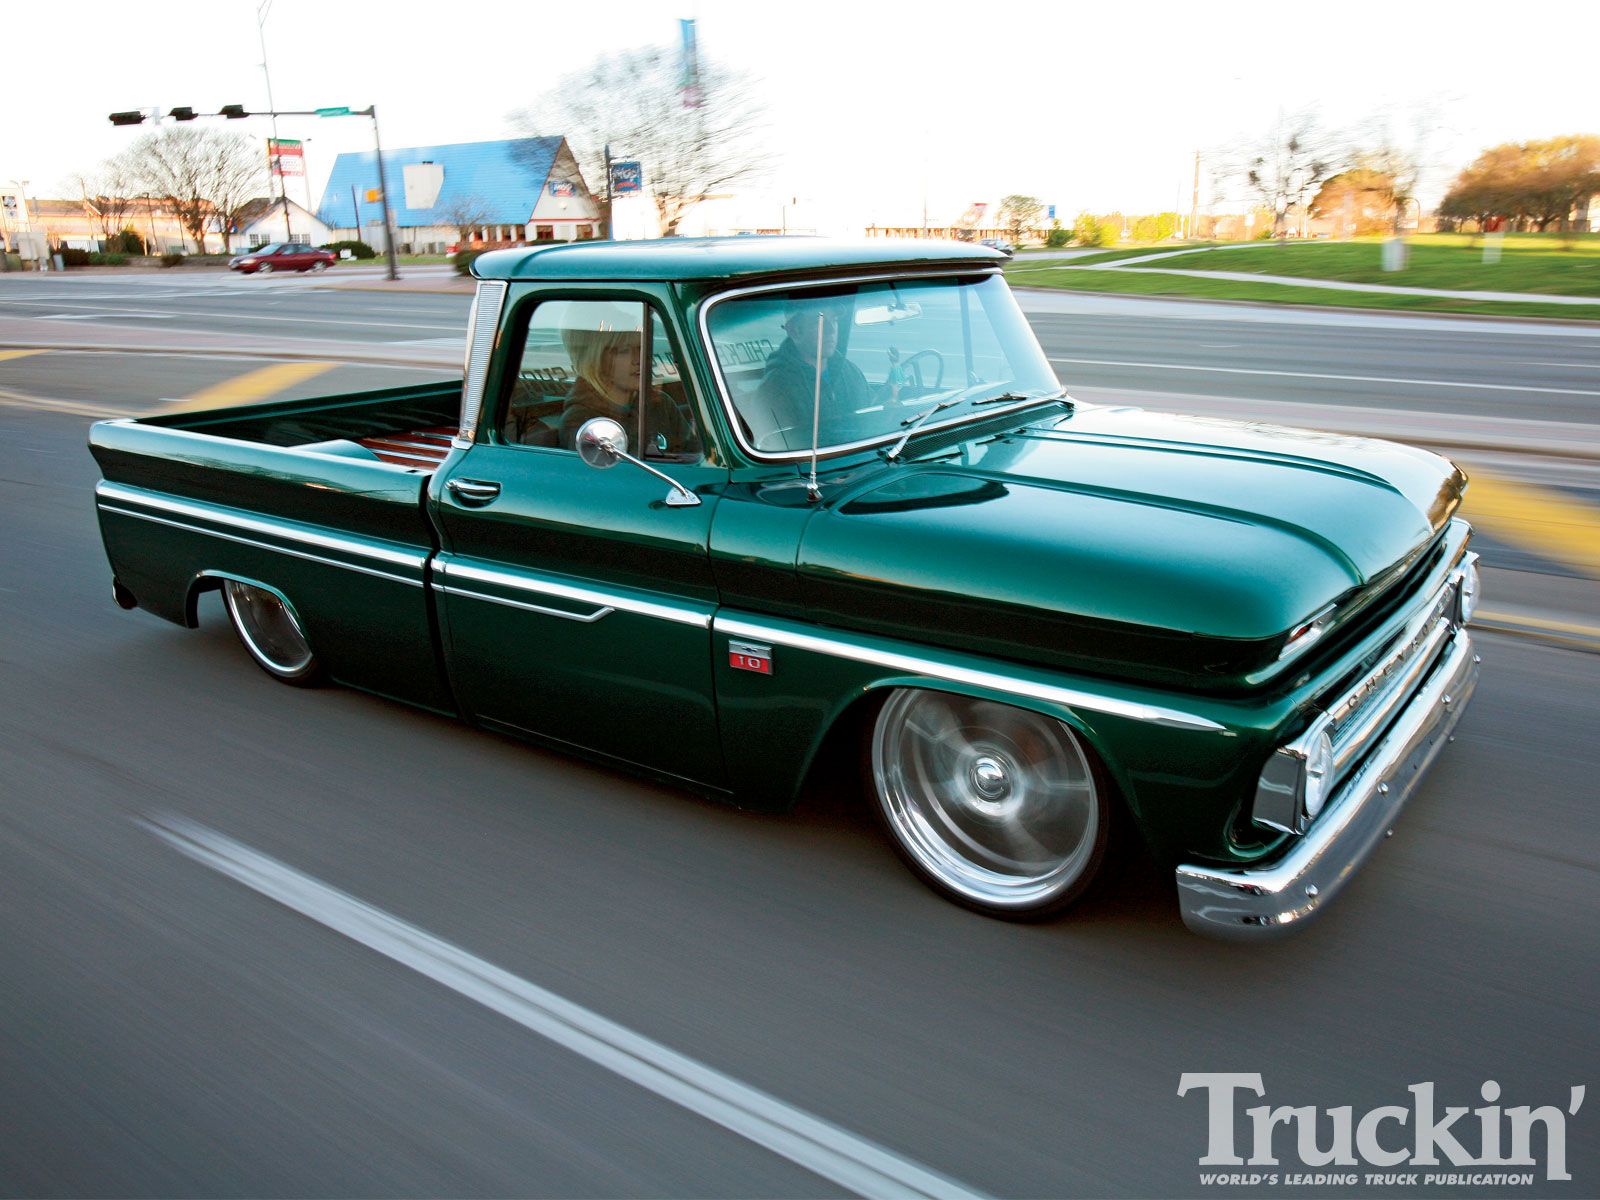 Top 5 Coolest Lifted and Lowered Classic Chevy Trucks